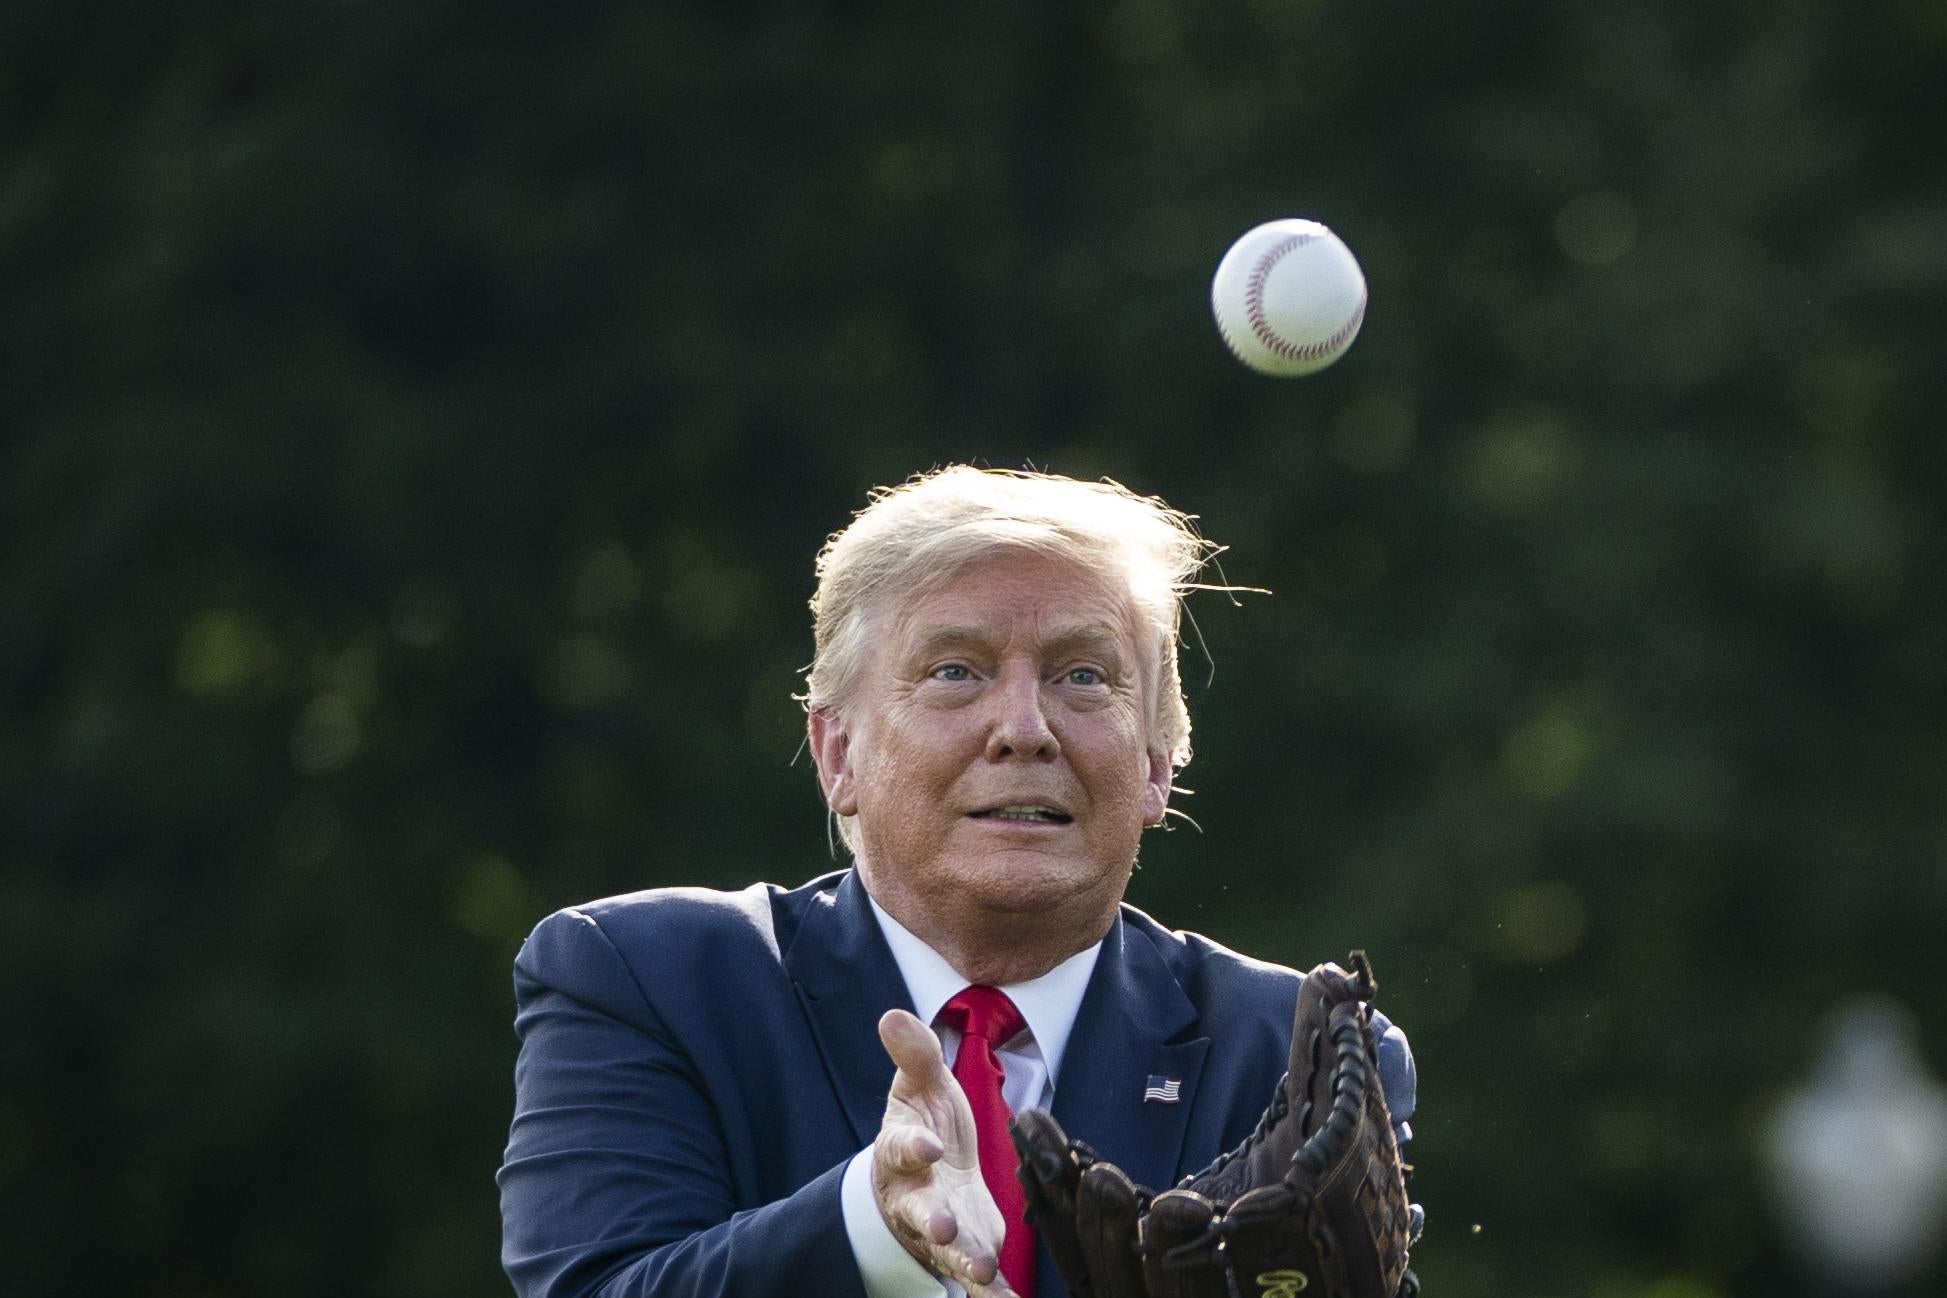 Then-President Donald Trump catches a baseball thrown by former New York Yankees Hall of Fame pitcher Mariano Rivera on the South Lawn of the White House on July 23, 2020 in Washington, D.C.